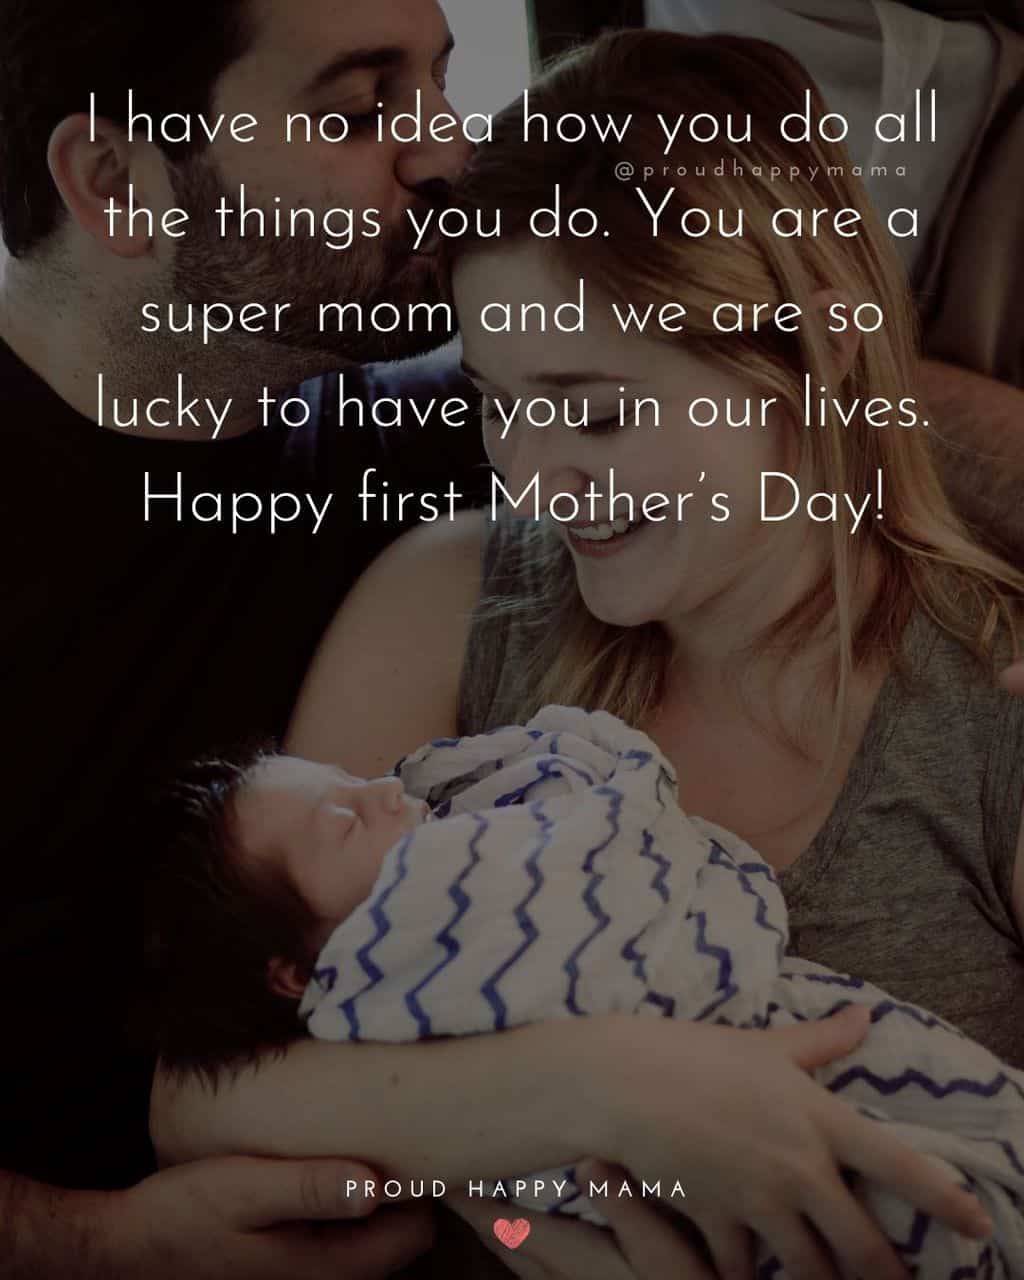 First Mothers Day Quotes - I have no idea how you do all the things you do. You are a super mom and we are so lucky to have you in our 